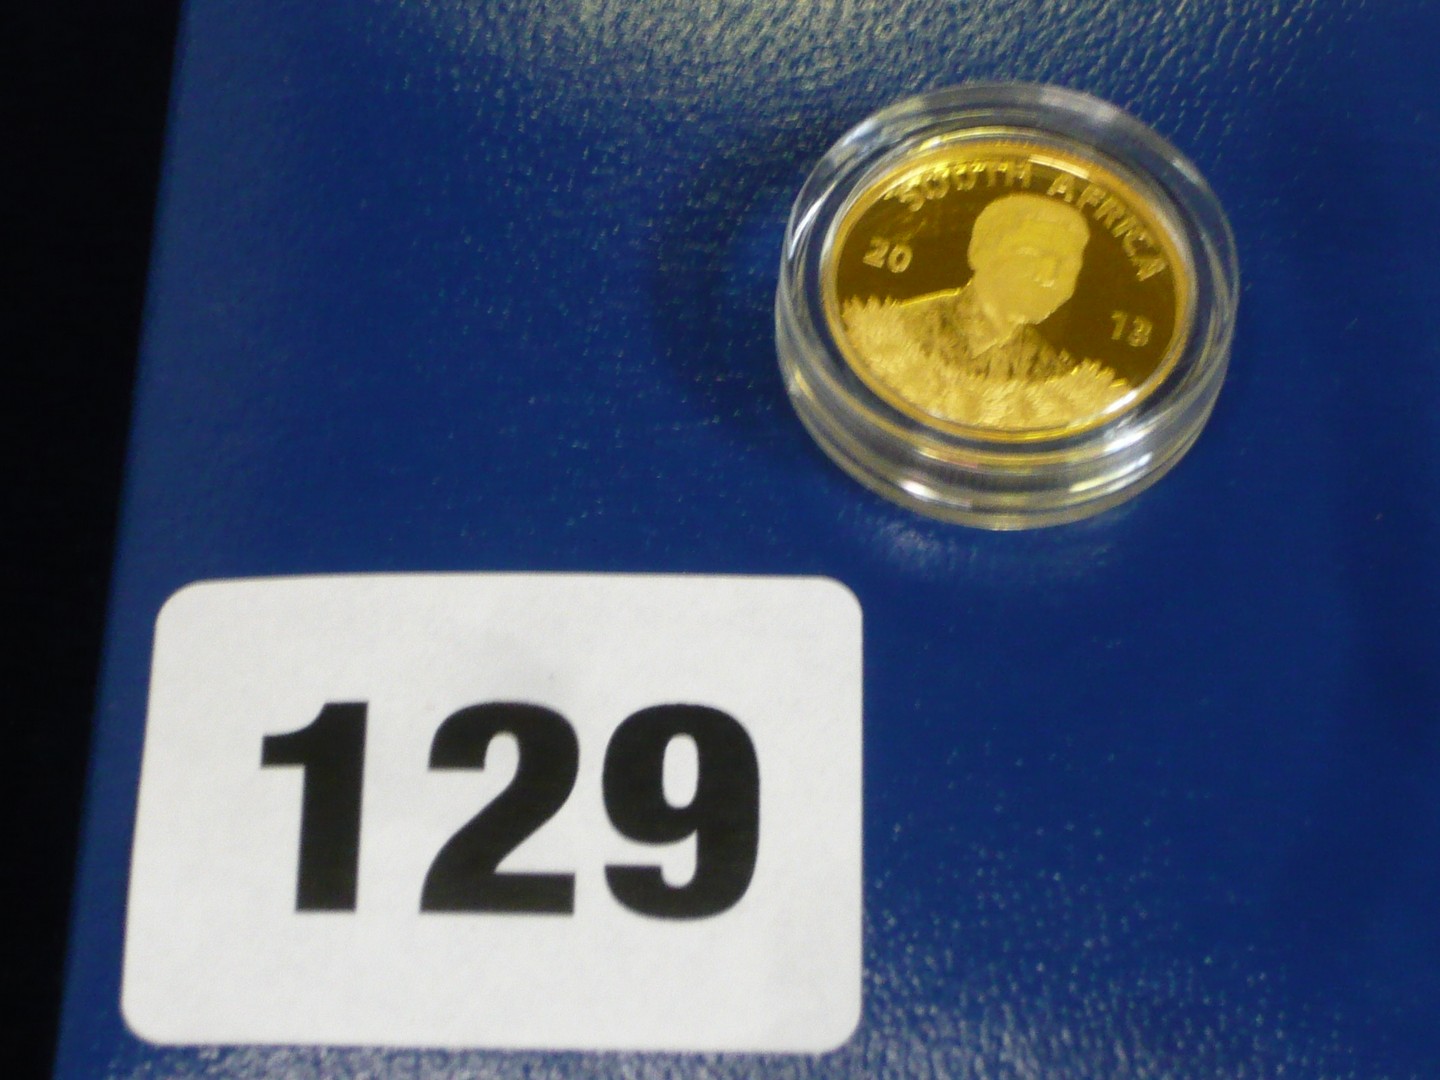 A South Africa '2013 Nelson Mandela' coin in 24 ct gold weighing 3.11g and in original box and